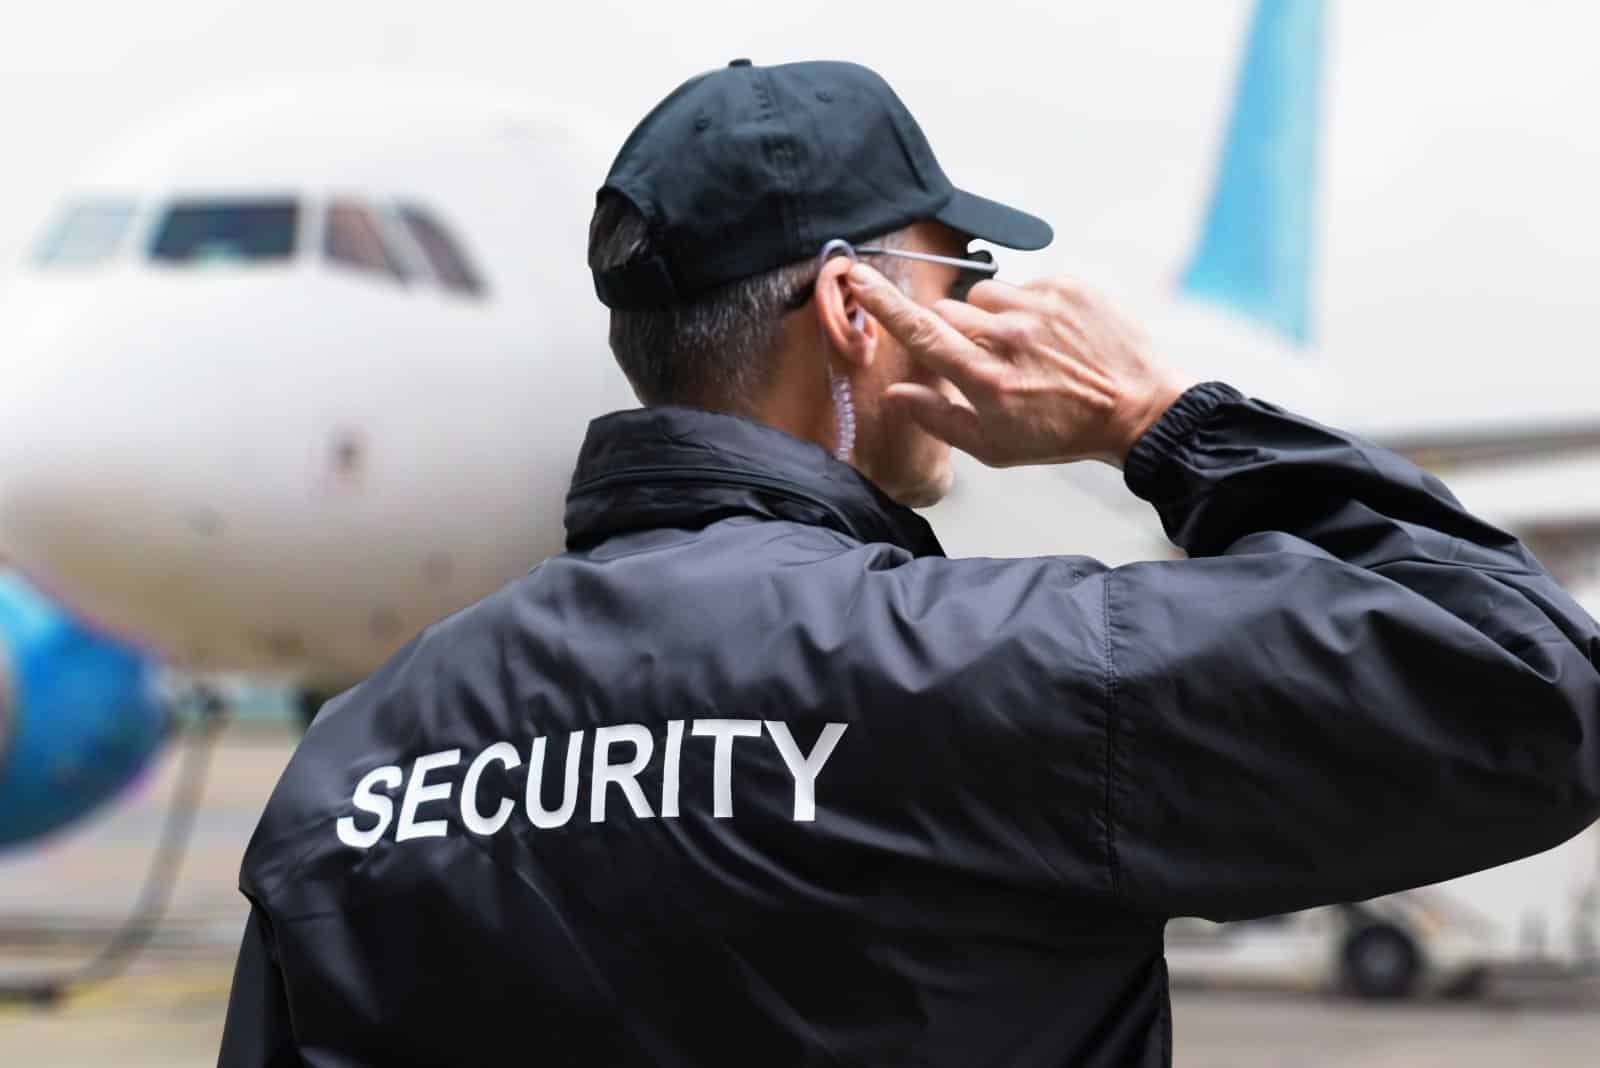 <p class="wp-caption-text">Image Credit: Shutterstock / Andrey_Popov</p>  <p>The days of playing it safe are over—literally. Trans travelers are pushing for higher safety standards, and destinations are listening (or learning the hard way). It’s not just about adding more security cameras; it’s about training staff, implementing inclusive policies, and fostering a culture of respect. Because let’s face it, the real adventure should be in your travel itinerary, not in navigating discrimination.</p>